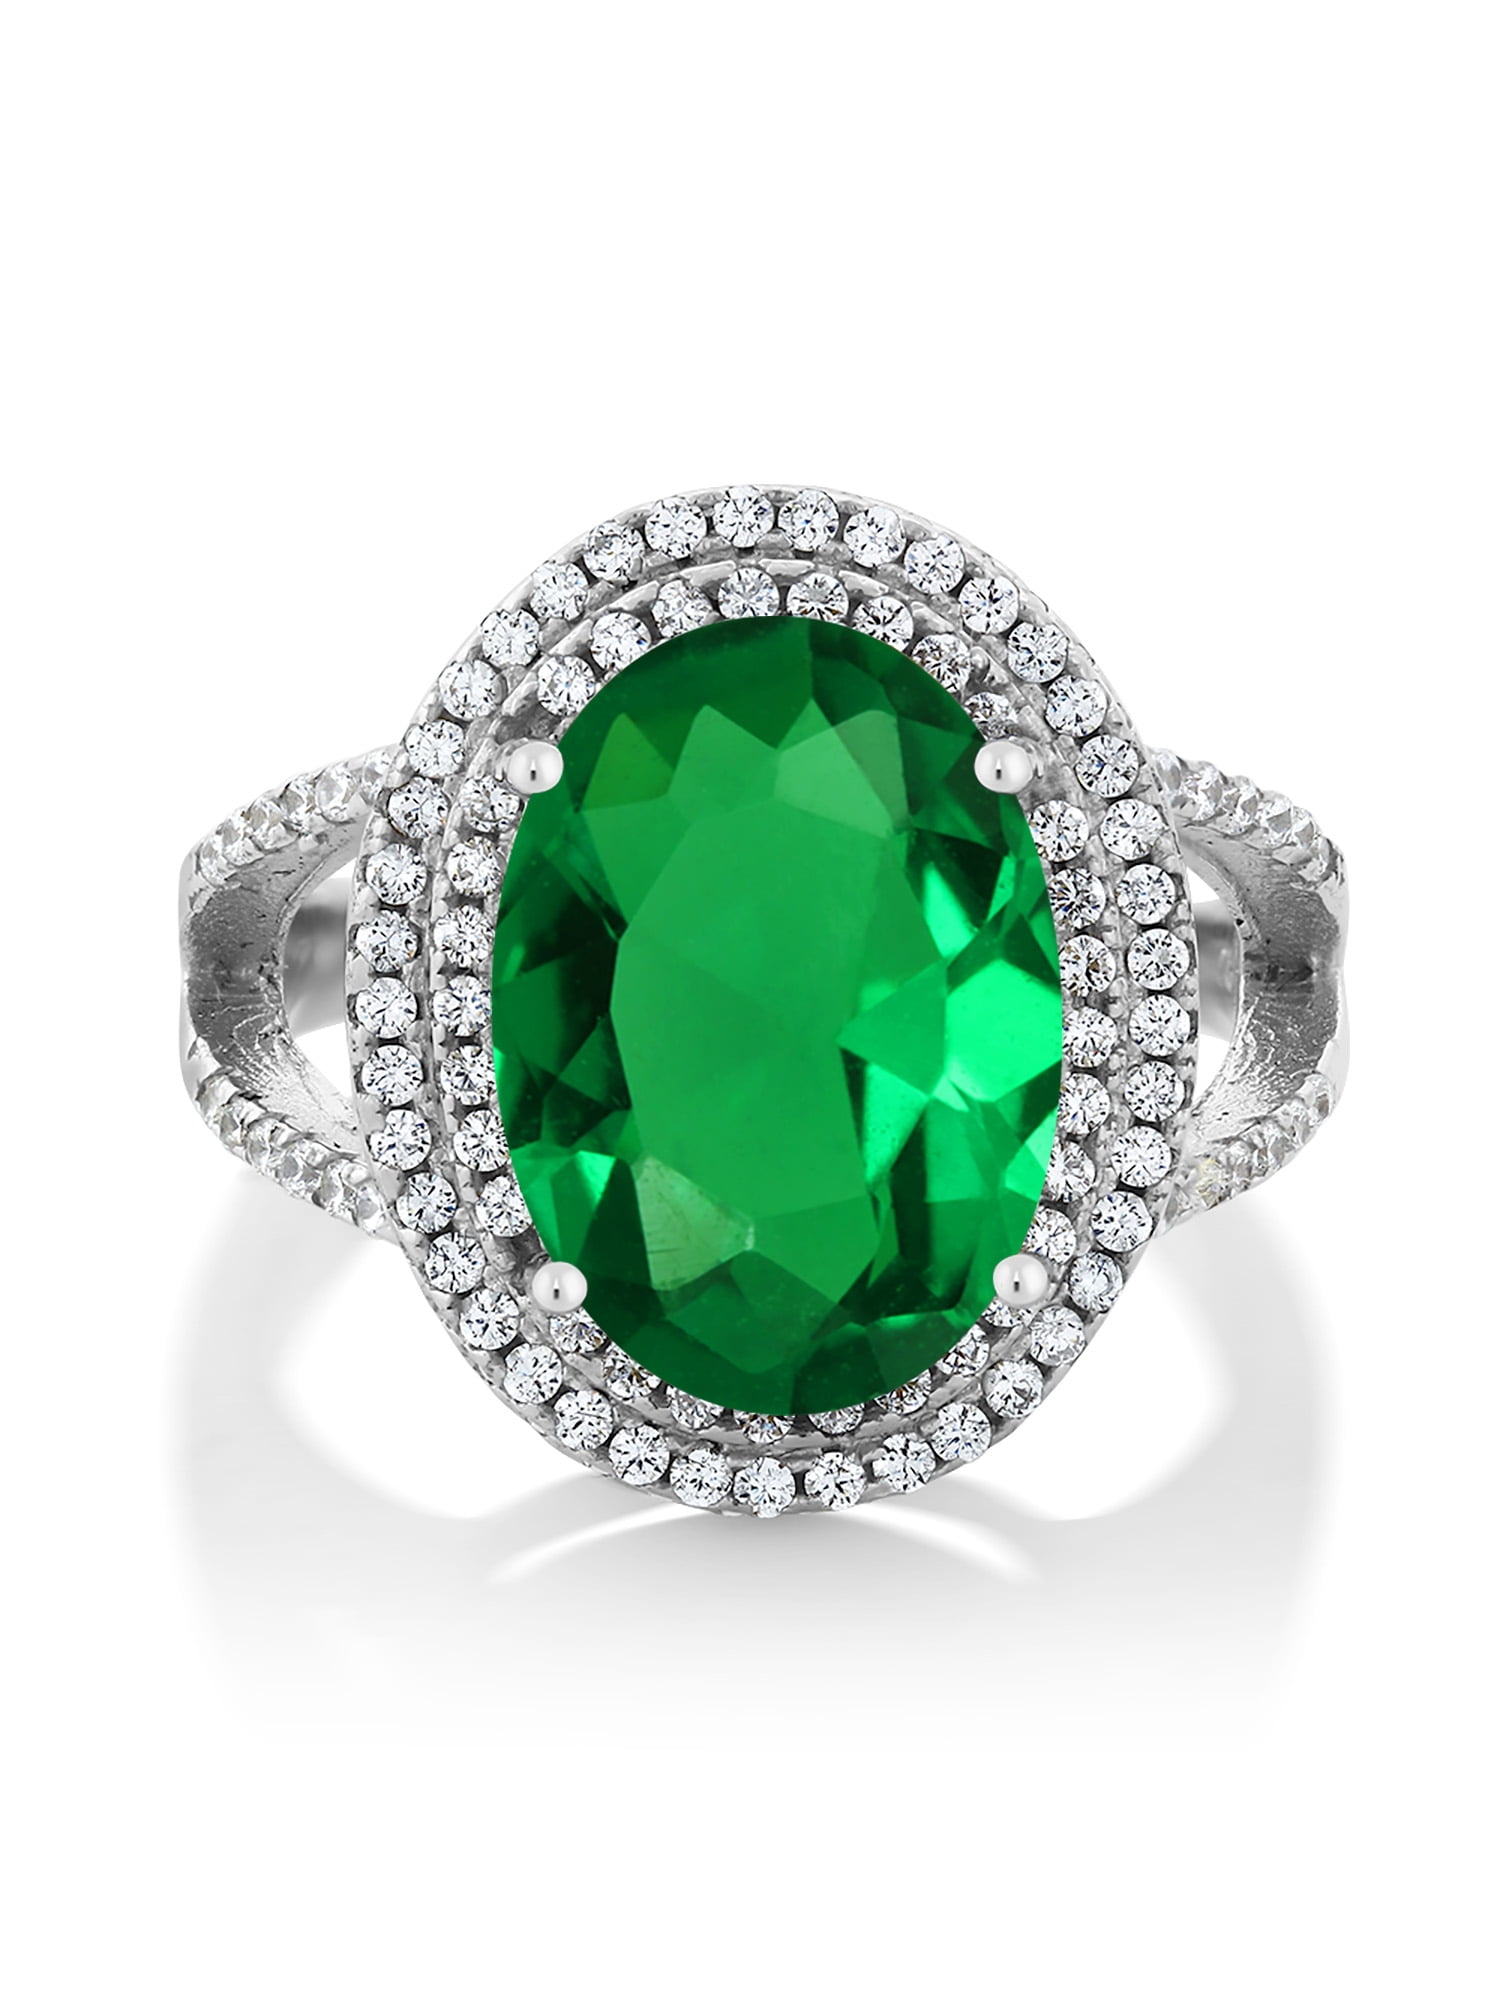 Oval Cut Emerald Ring Green Gemstone Ring 925 Sterling Silver Promise Ring 7*5 mm Emerald Engagement Ring